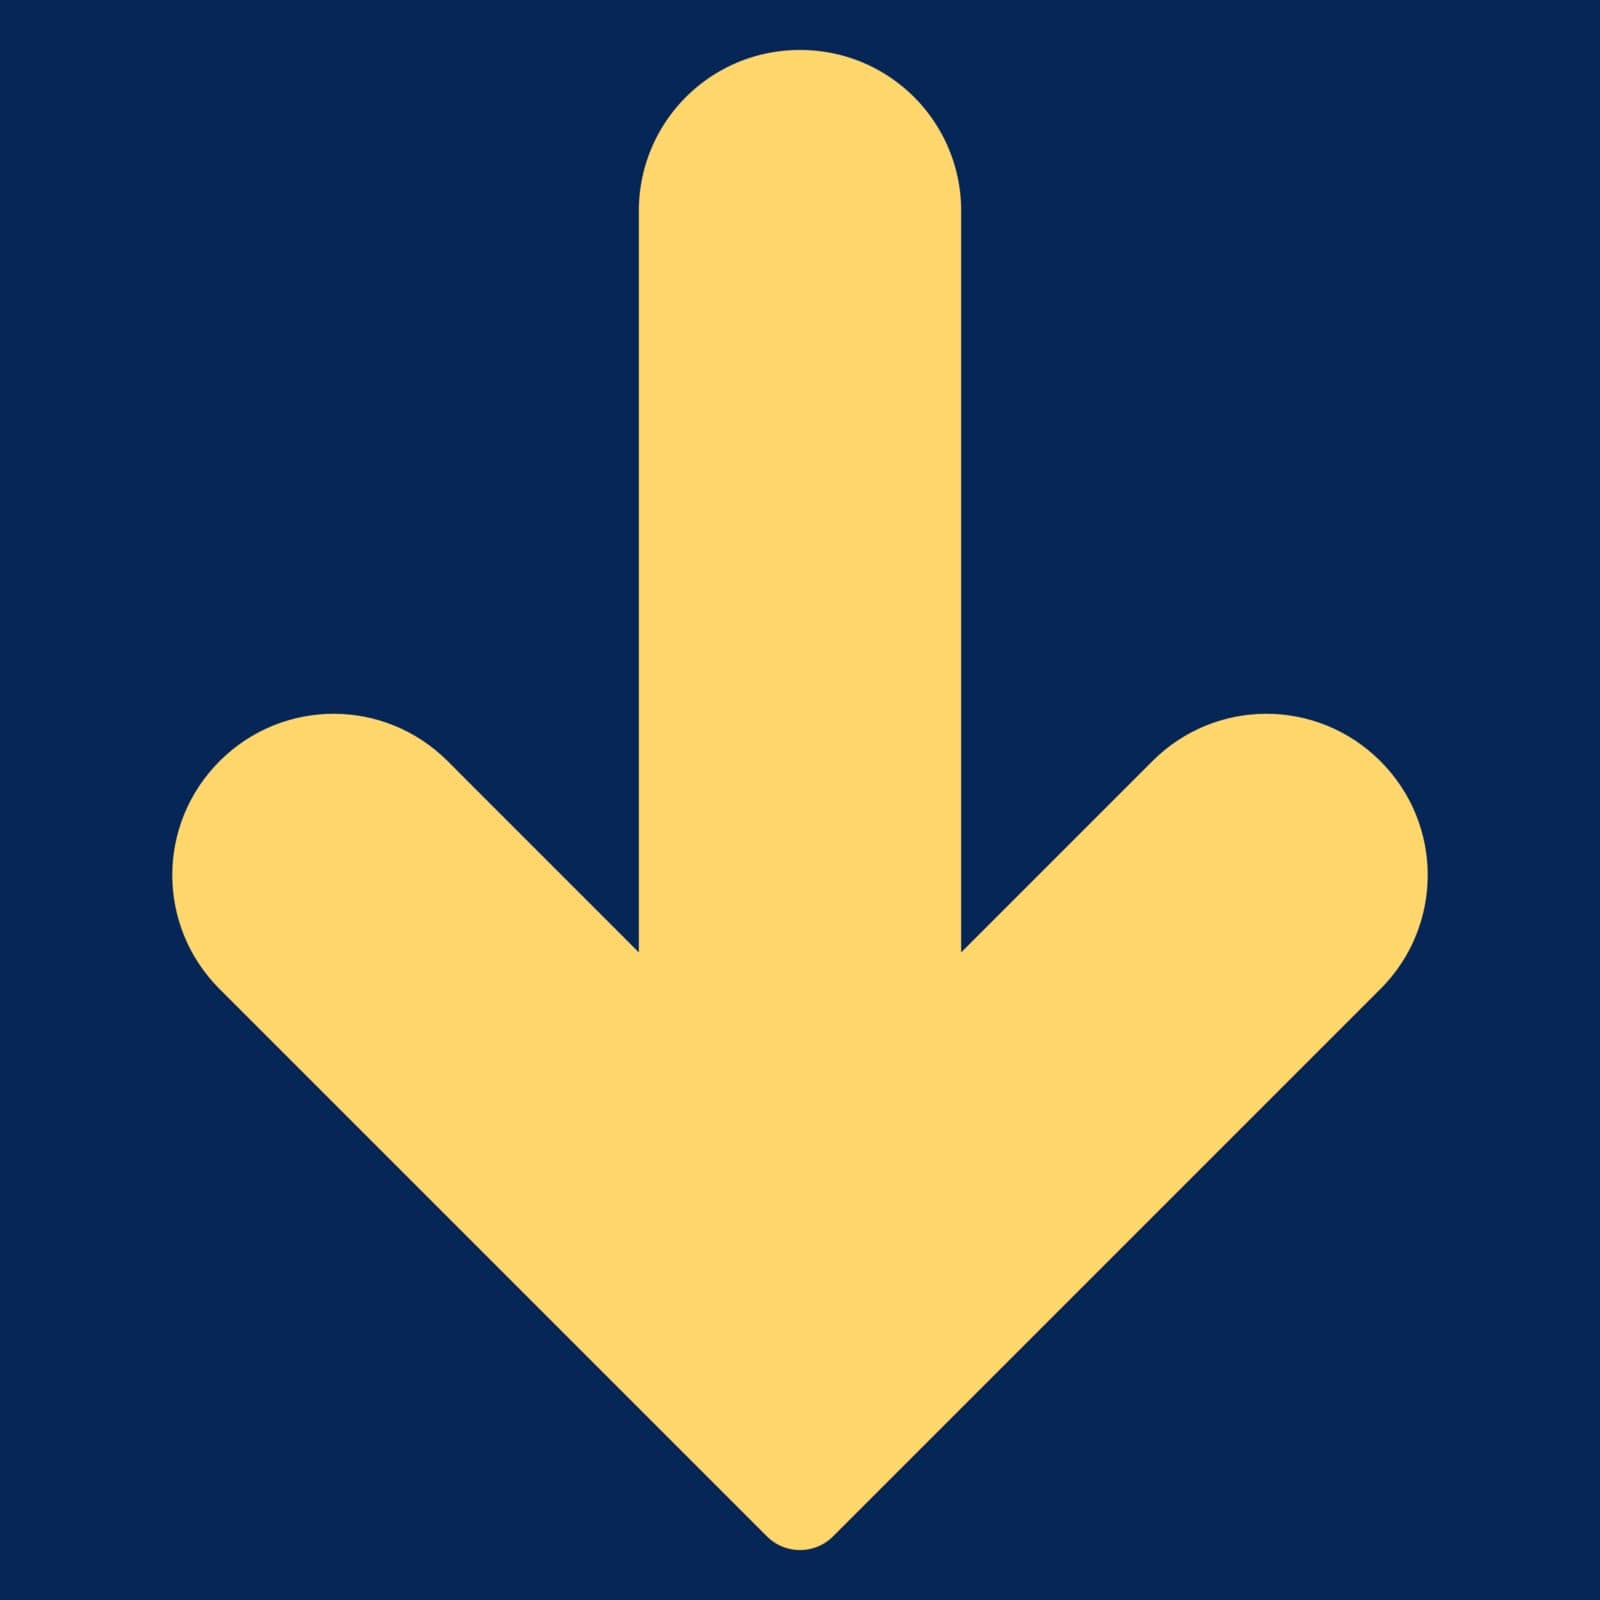 Arrow Down icon from Primitive Set. This isolated flat symbol is drawn with yellow color on a blue background, angles are rounded.